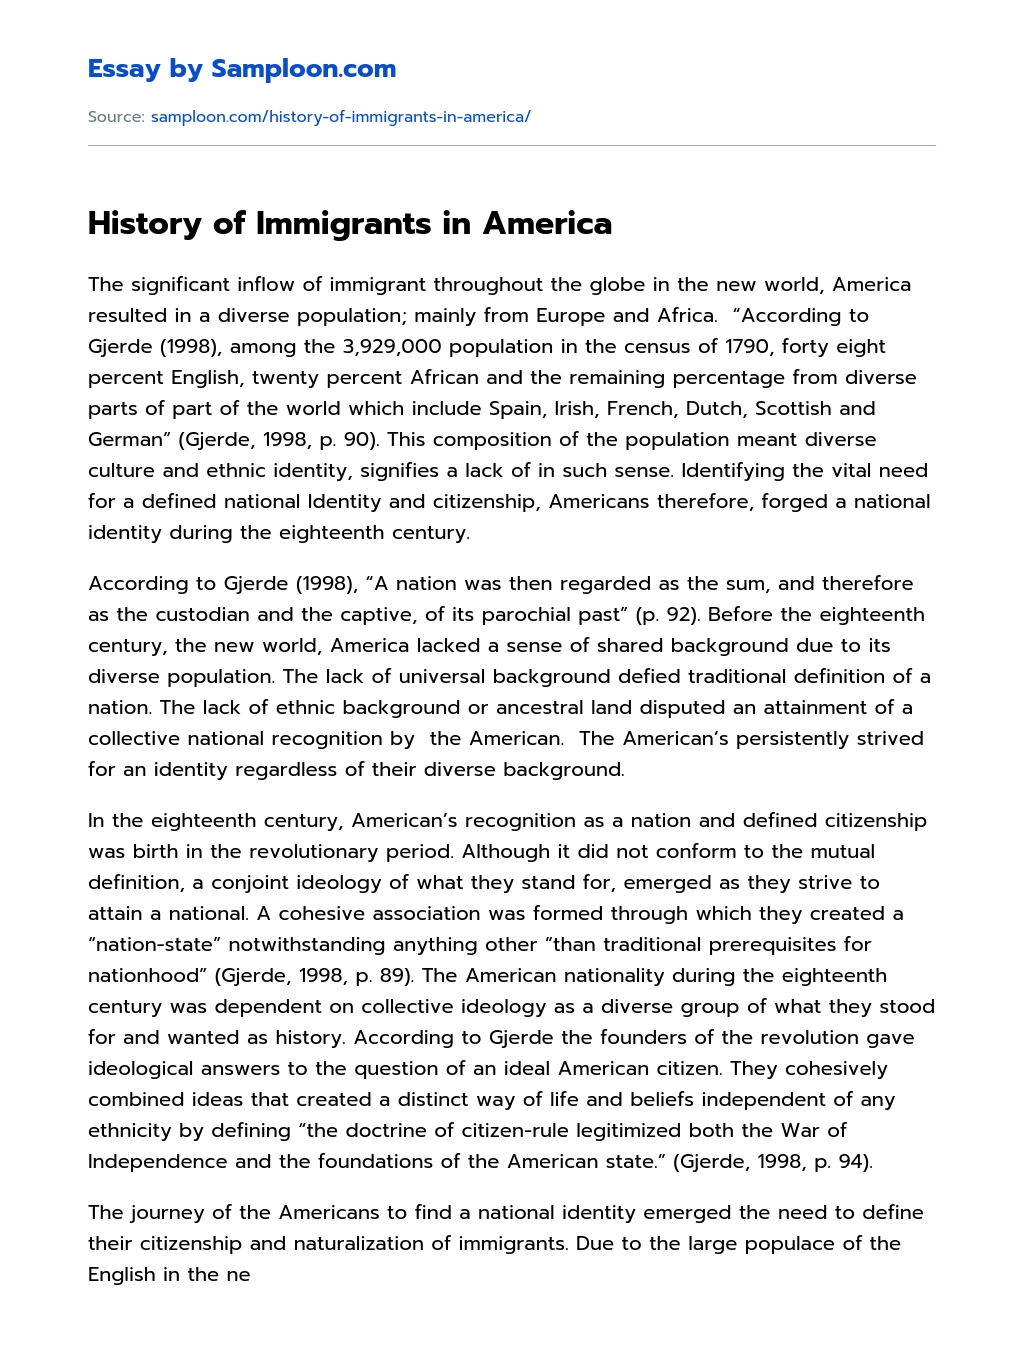 History of Immigrants in America essay